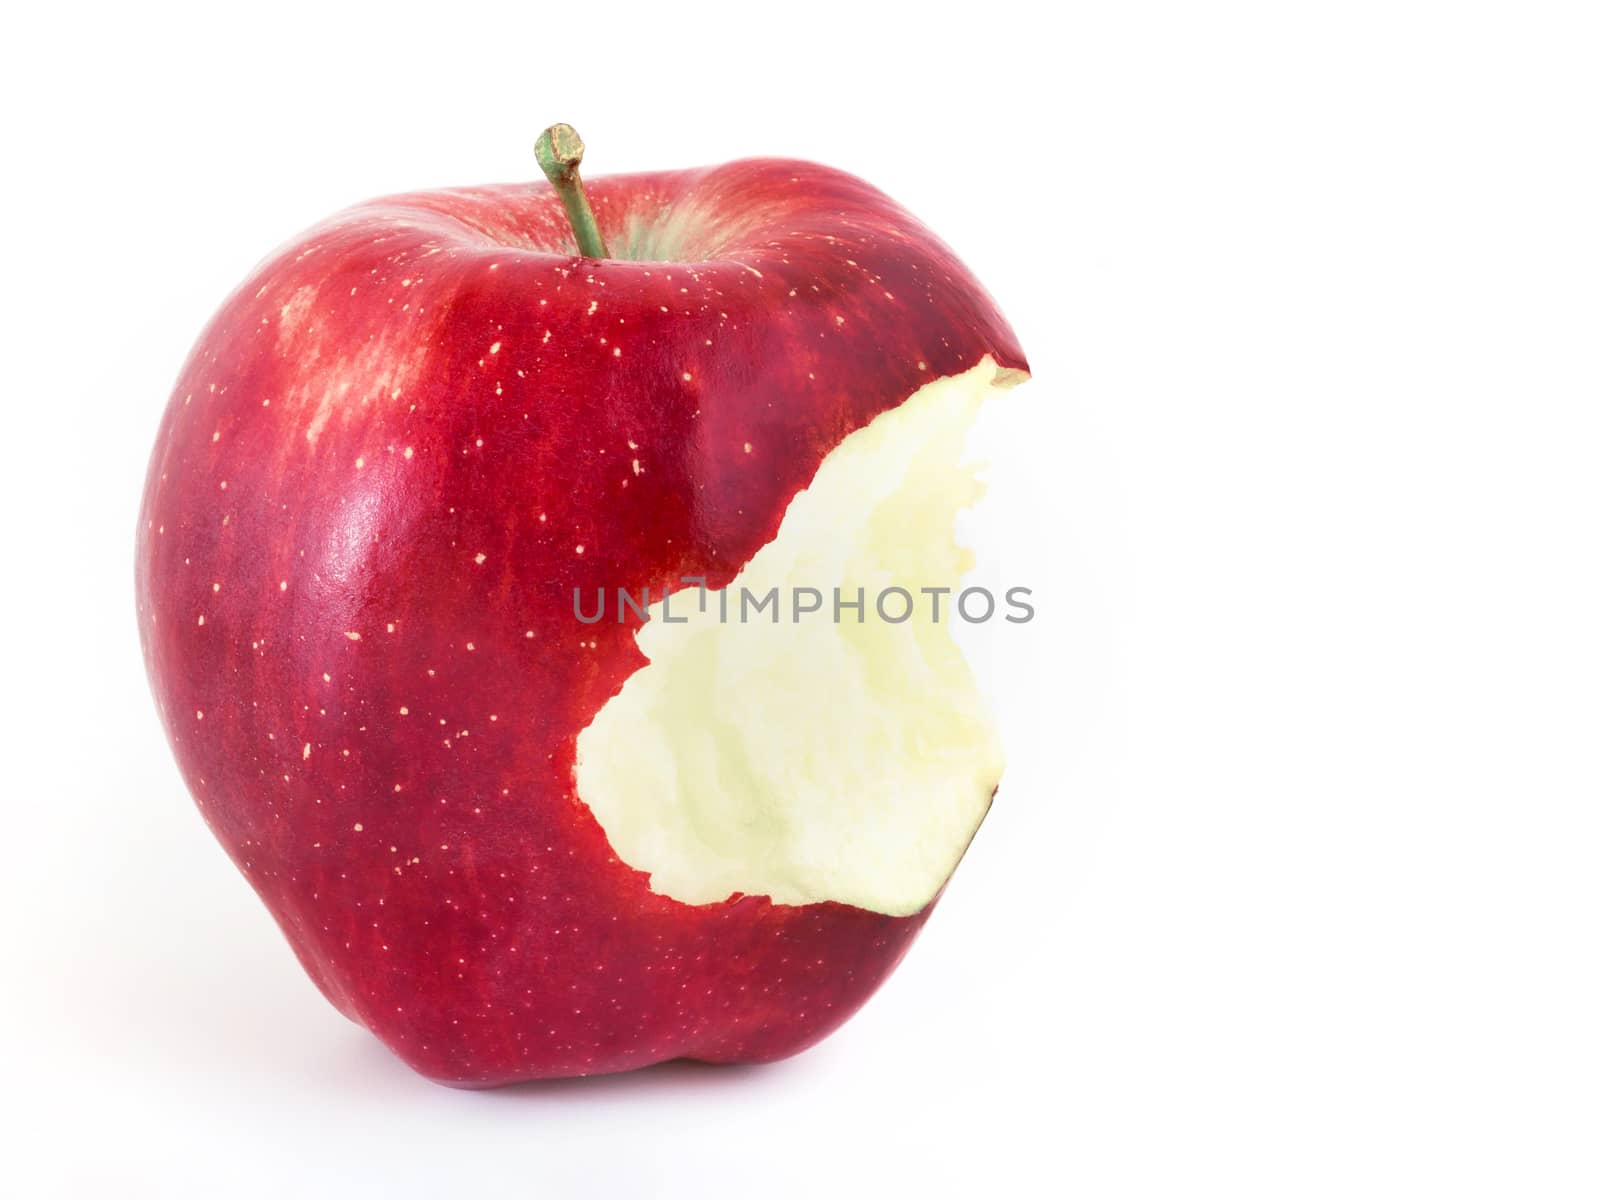 Red bitten apple on white background. Copy-space.